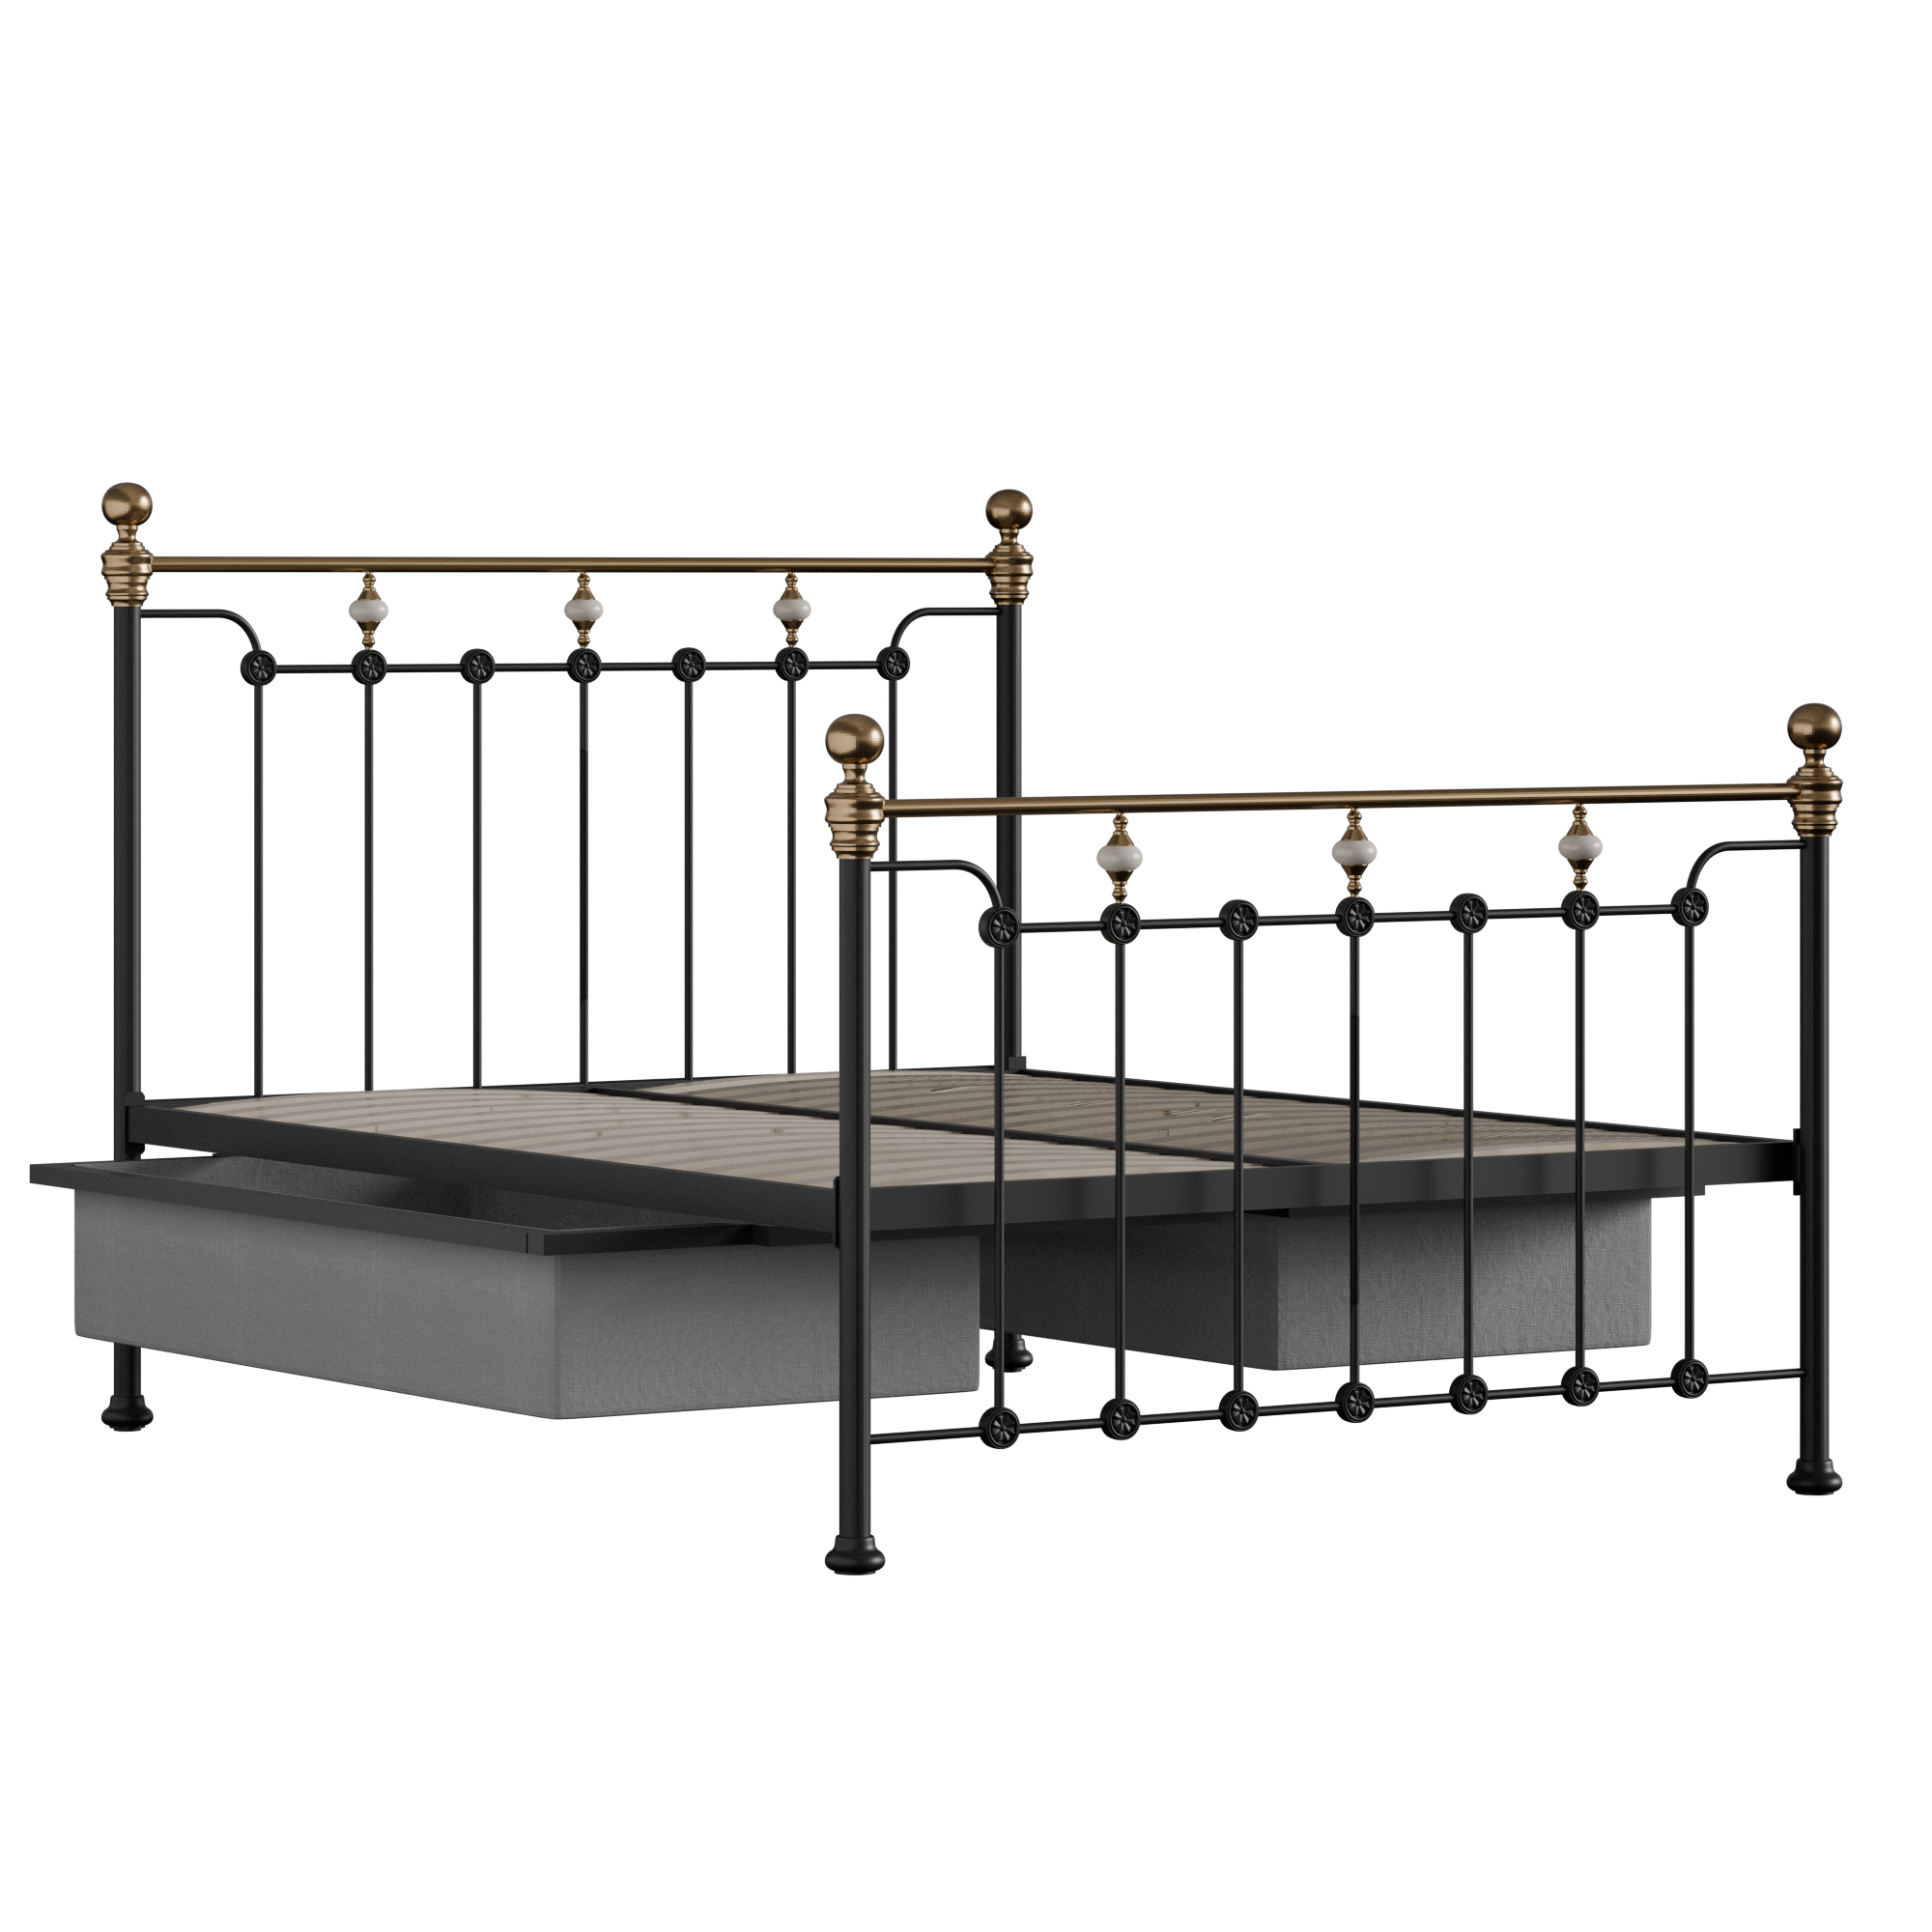 Glenholm iron/metal bed in black with drawers